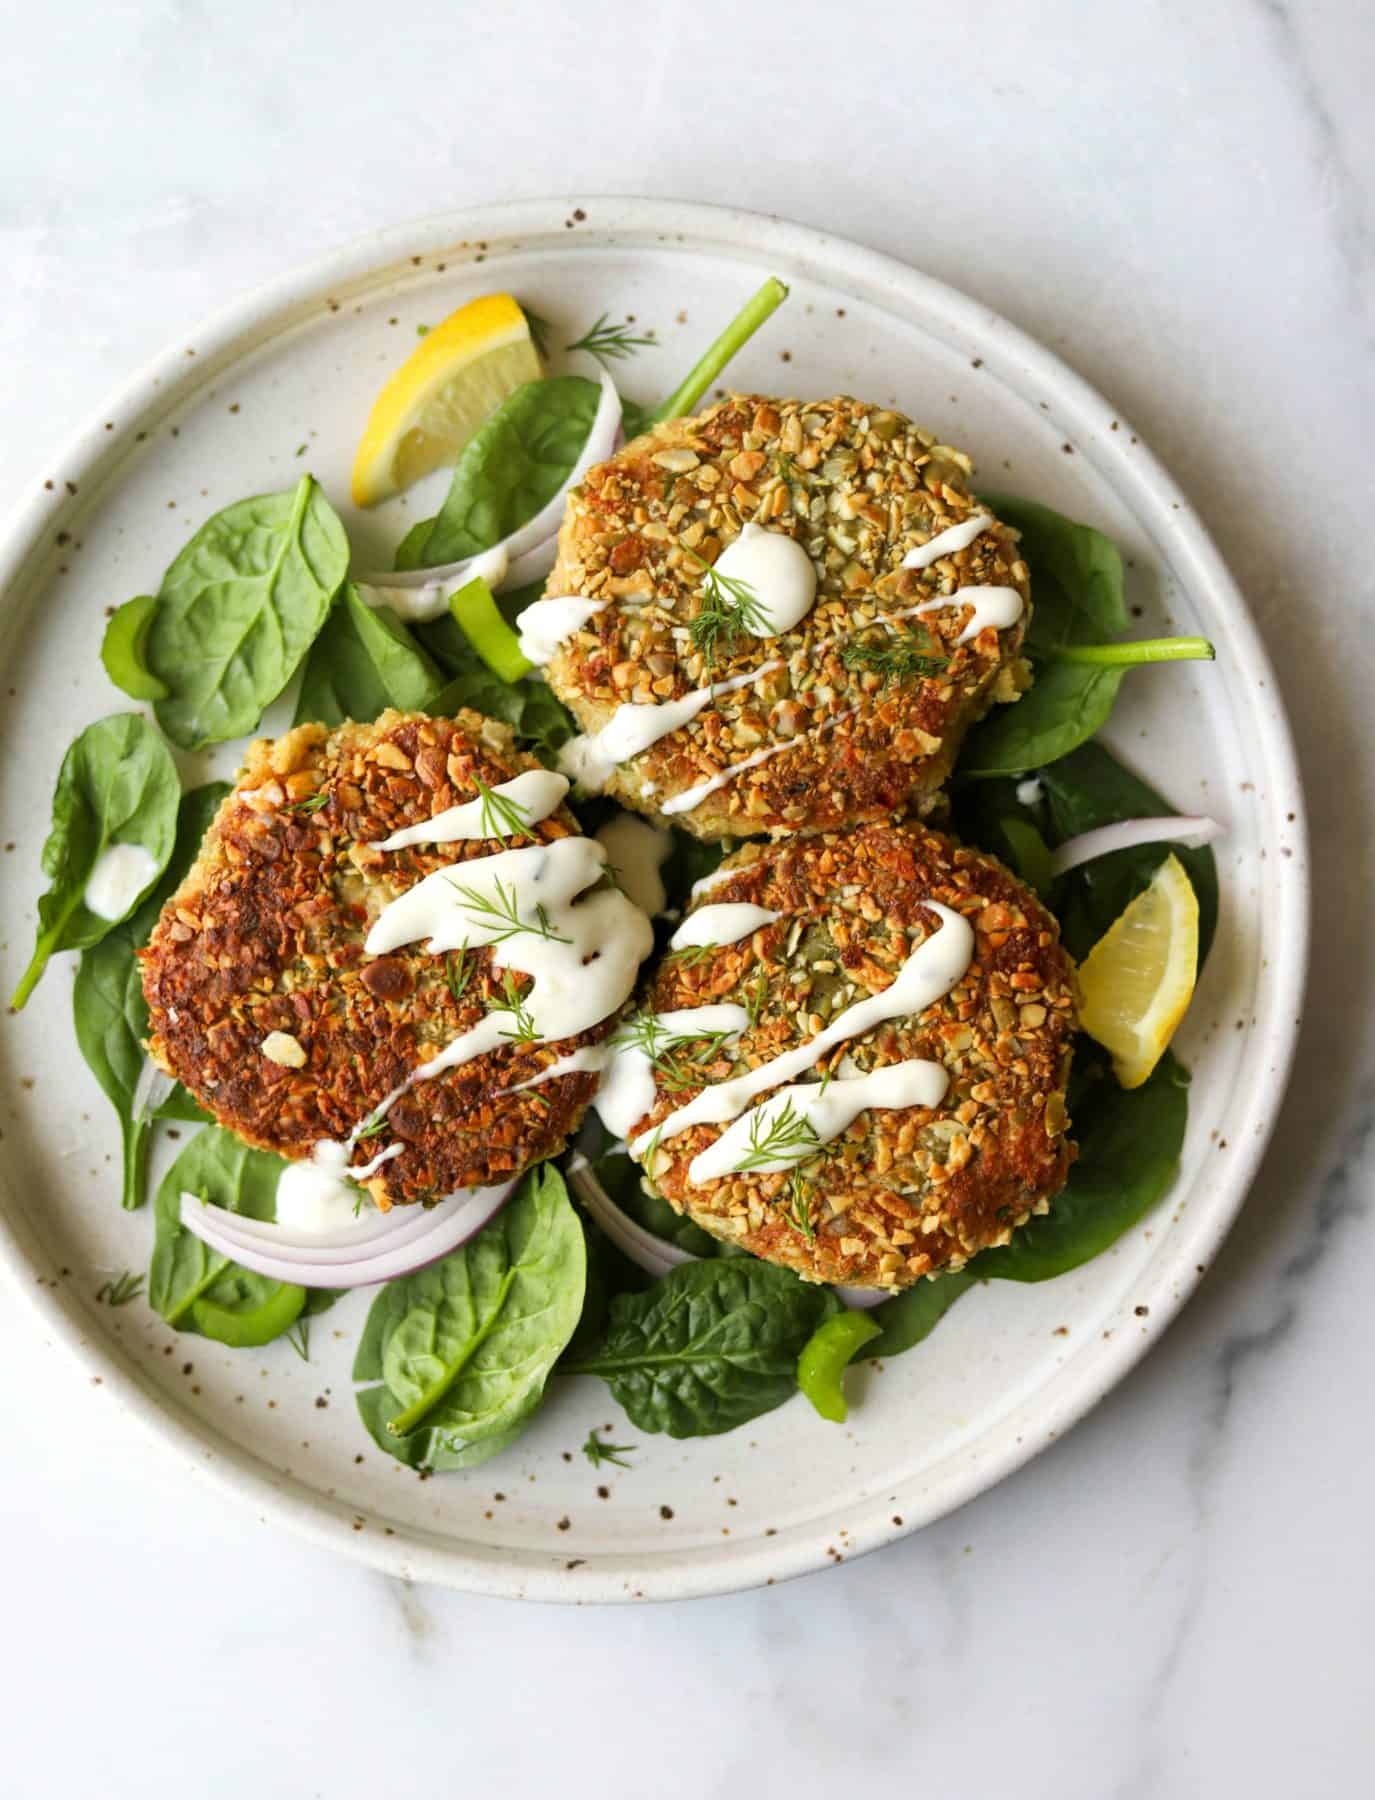 Crispy pepita-crusted tuna cakes on a bed of greens as an easy way to eat more fish.